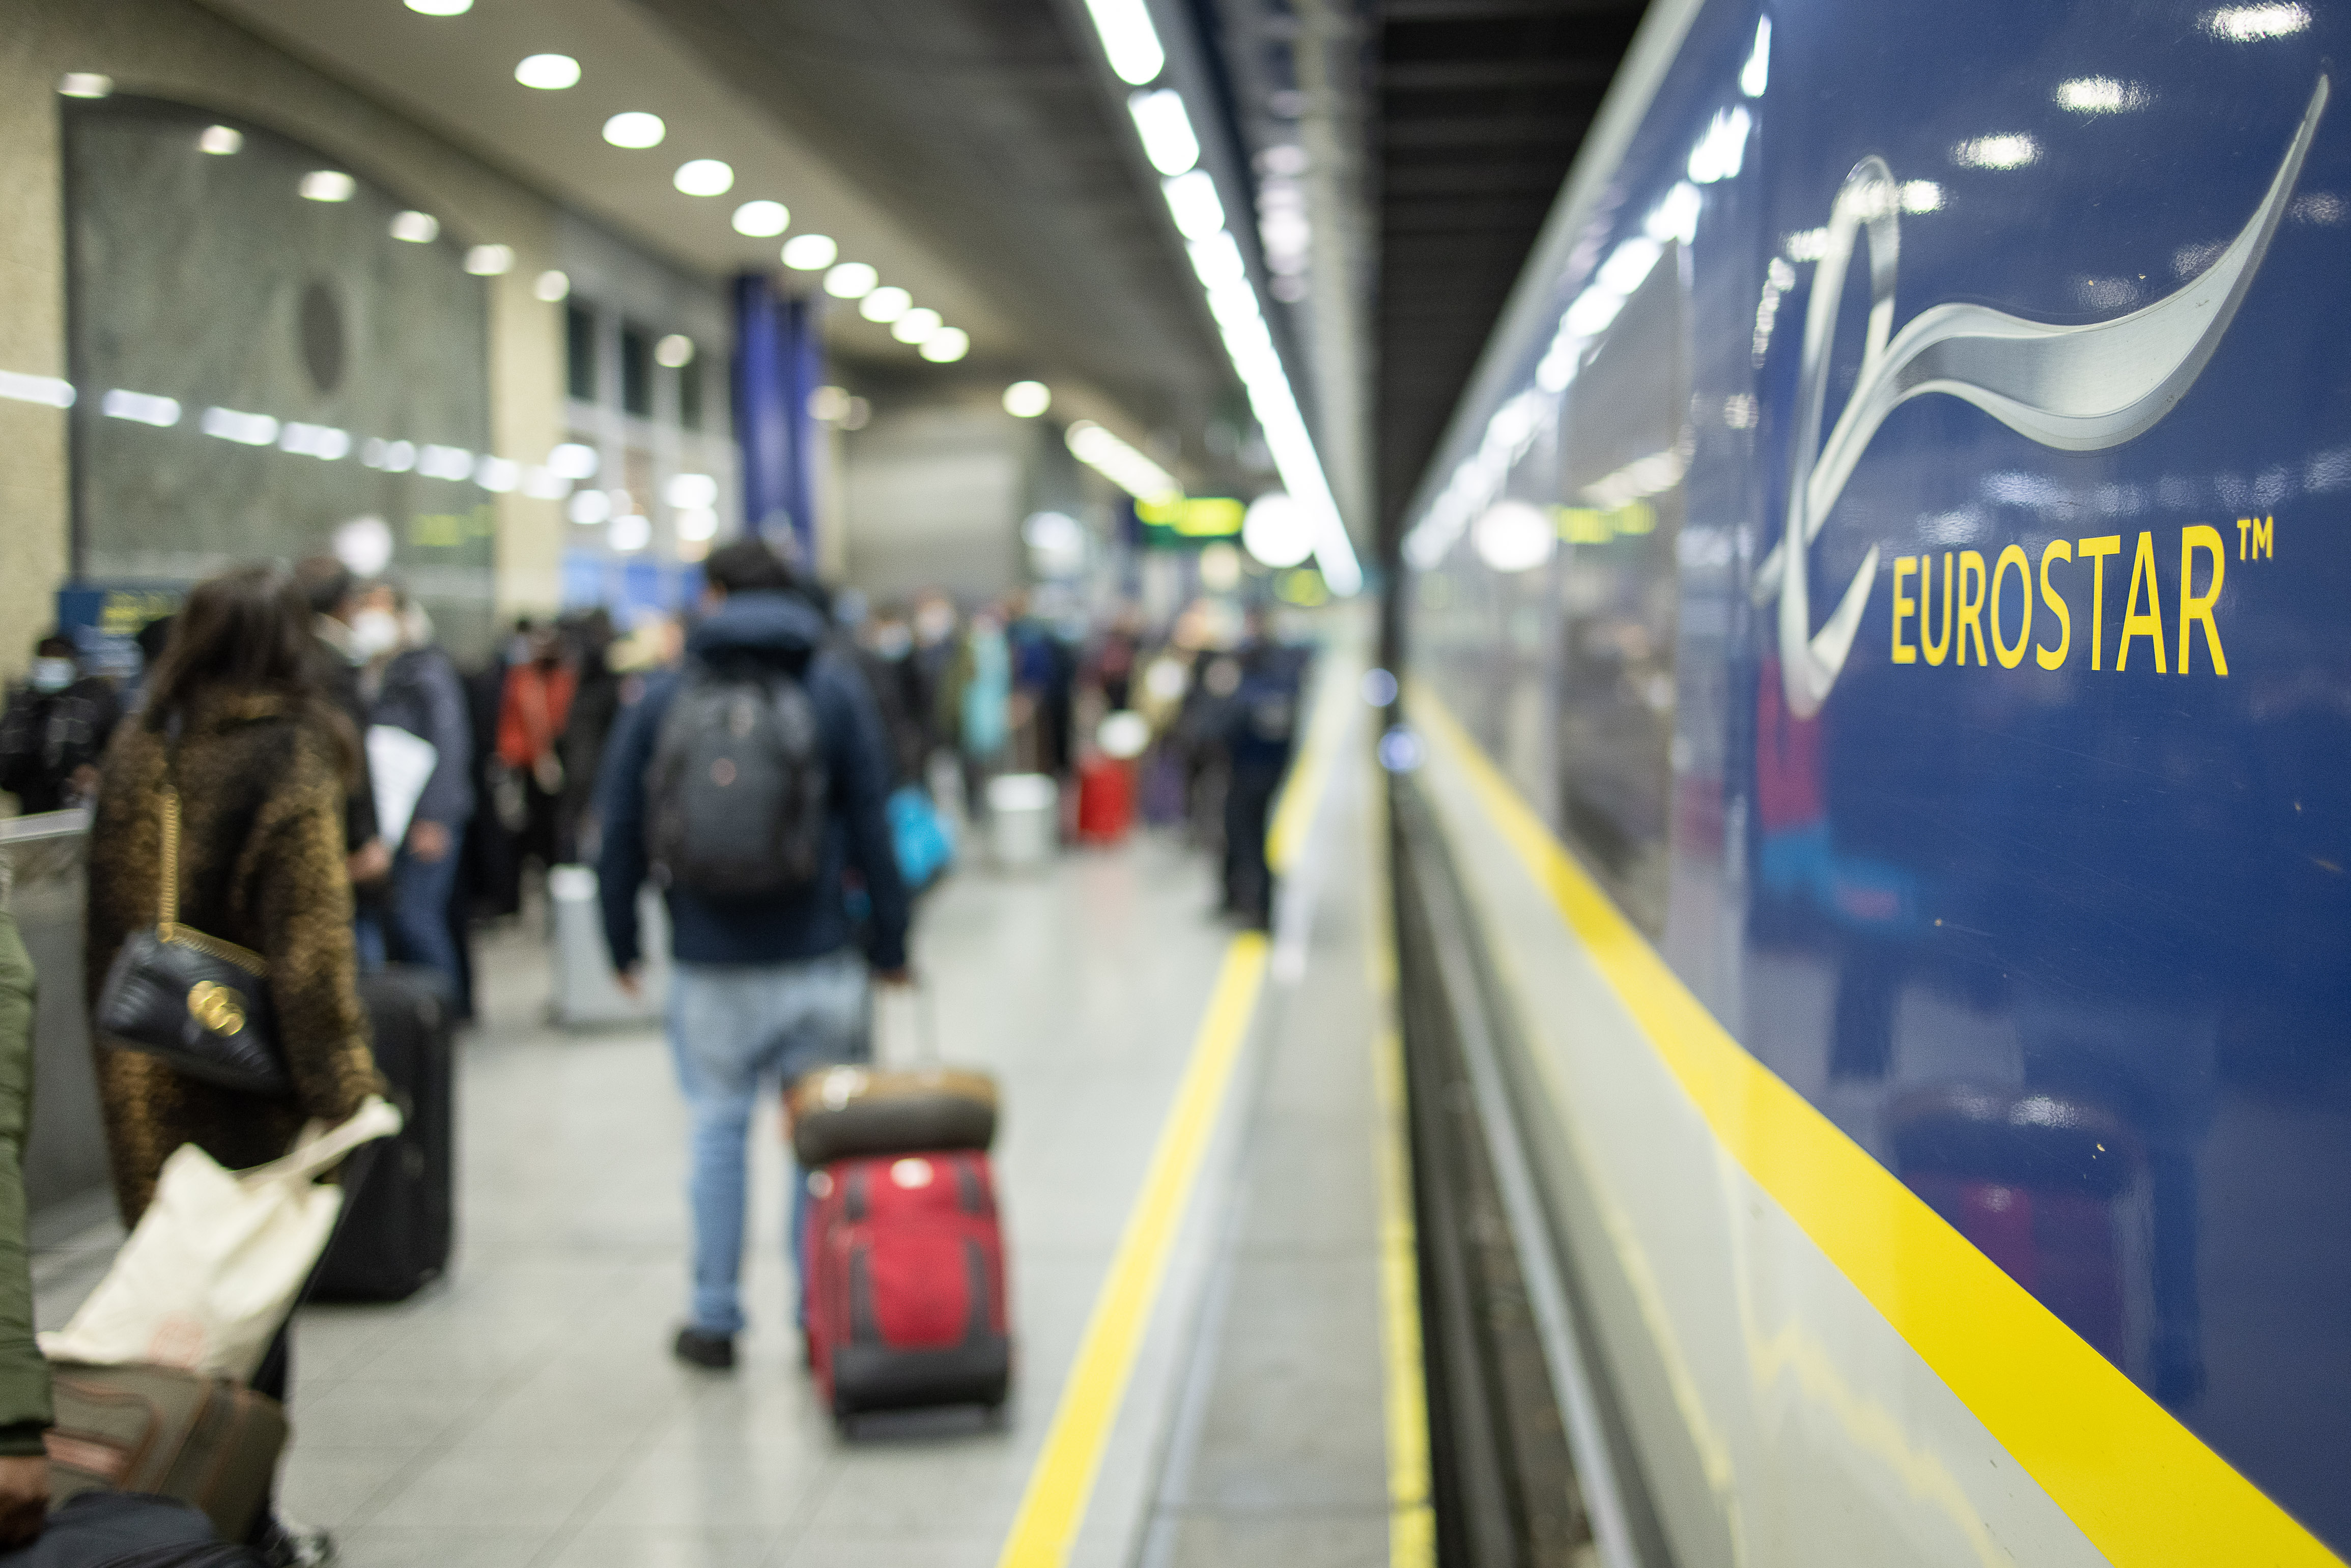 Eurostar to increase train capacity due to more bookings